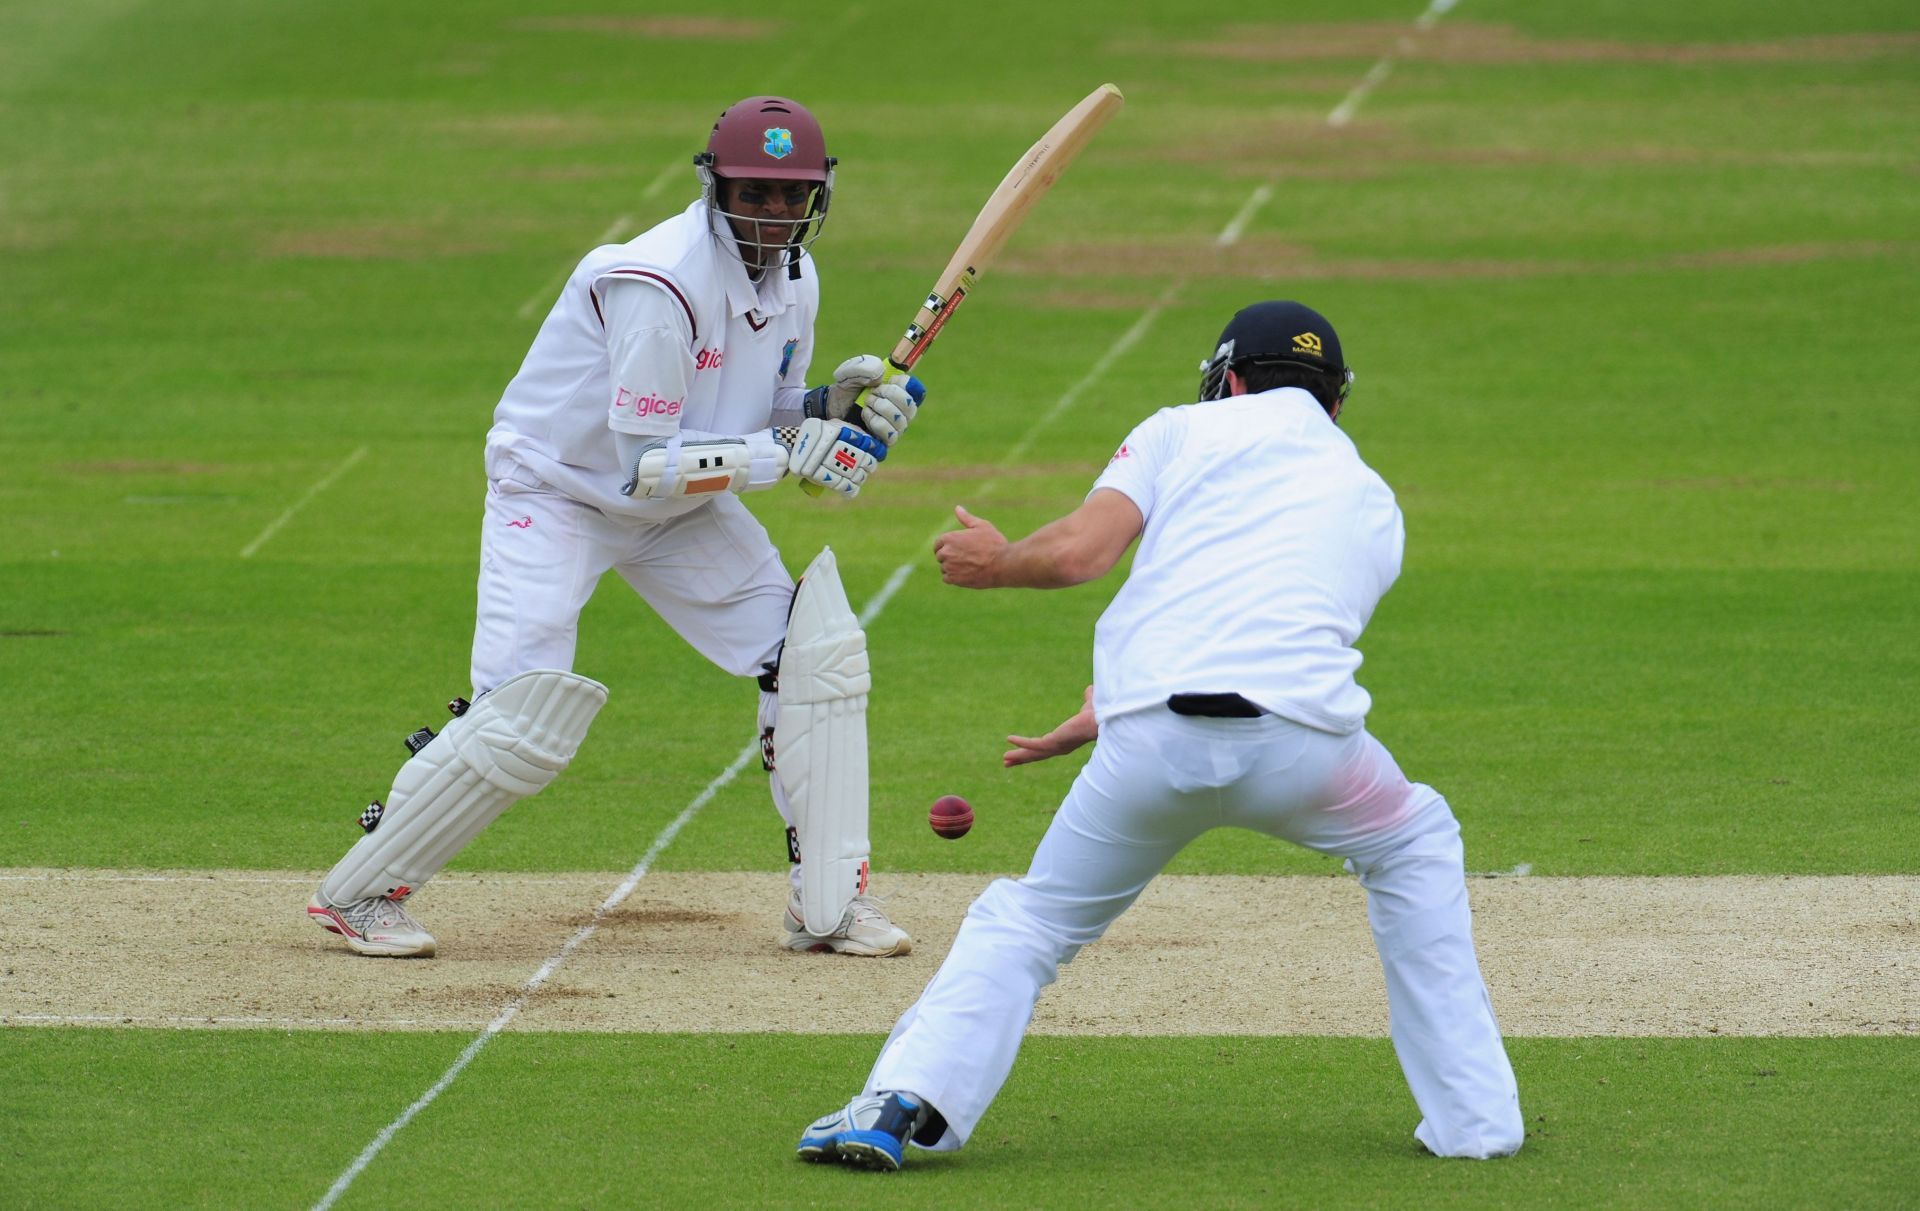 Shivnarine Chanderpaul played for West Indies during his time as an active cricketer (Image courtesy: Getty Images)